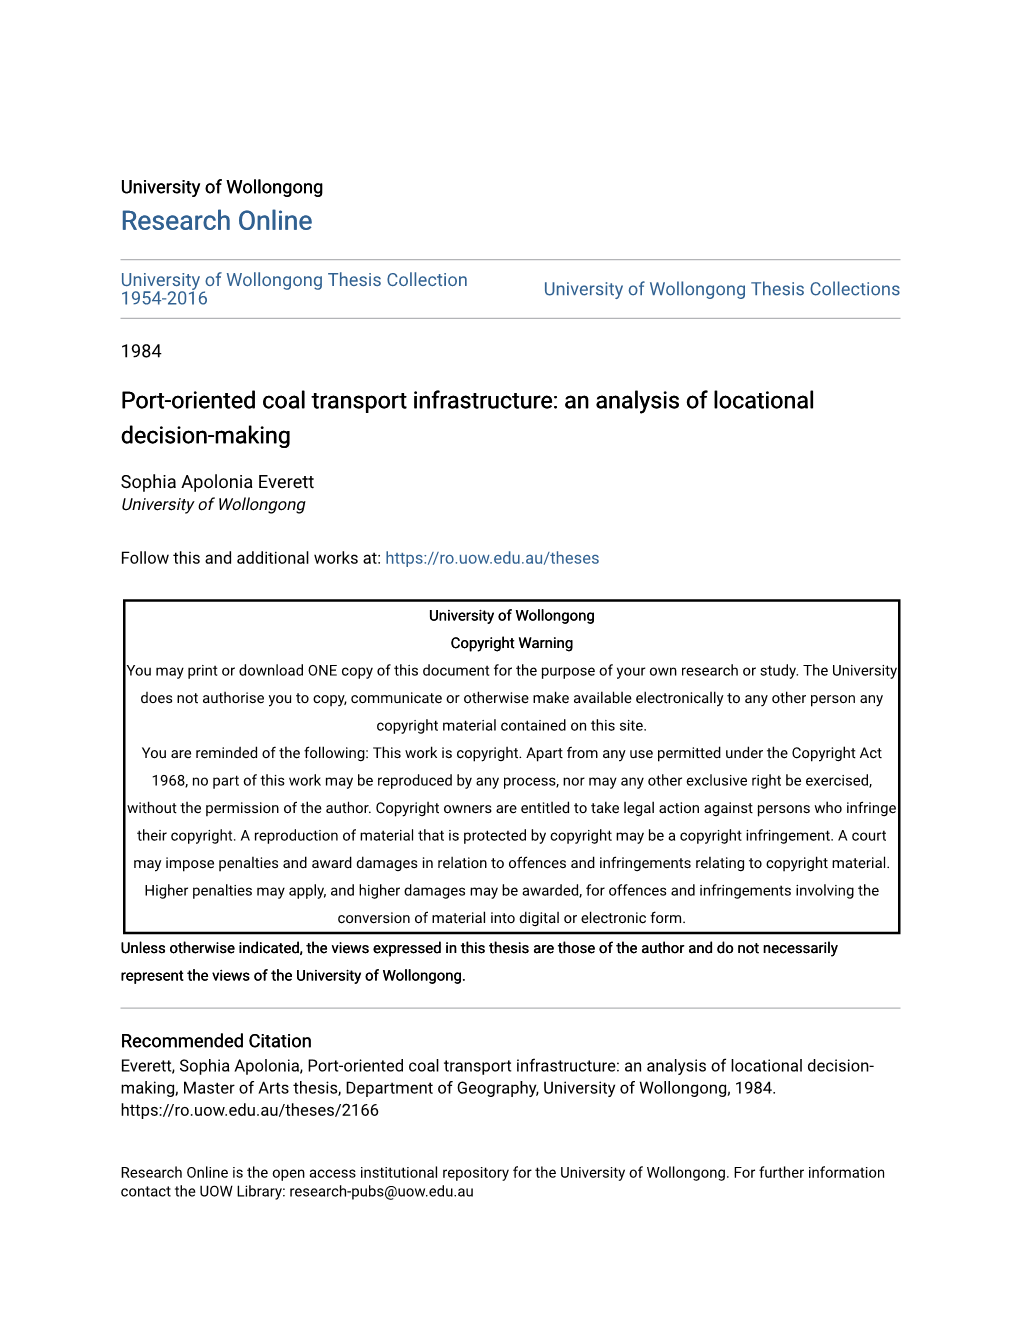 Port-Oriented Coal Transport Infrastructure: an Analysis of Locational Decision-Making